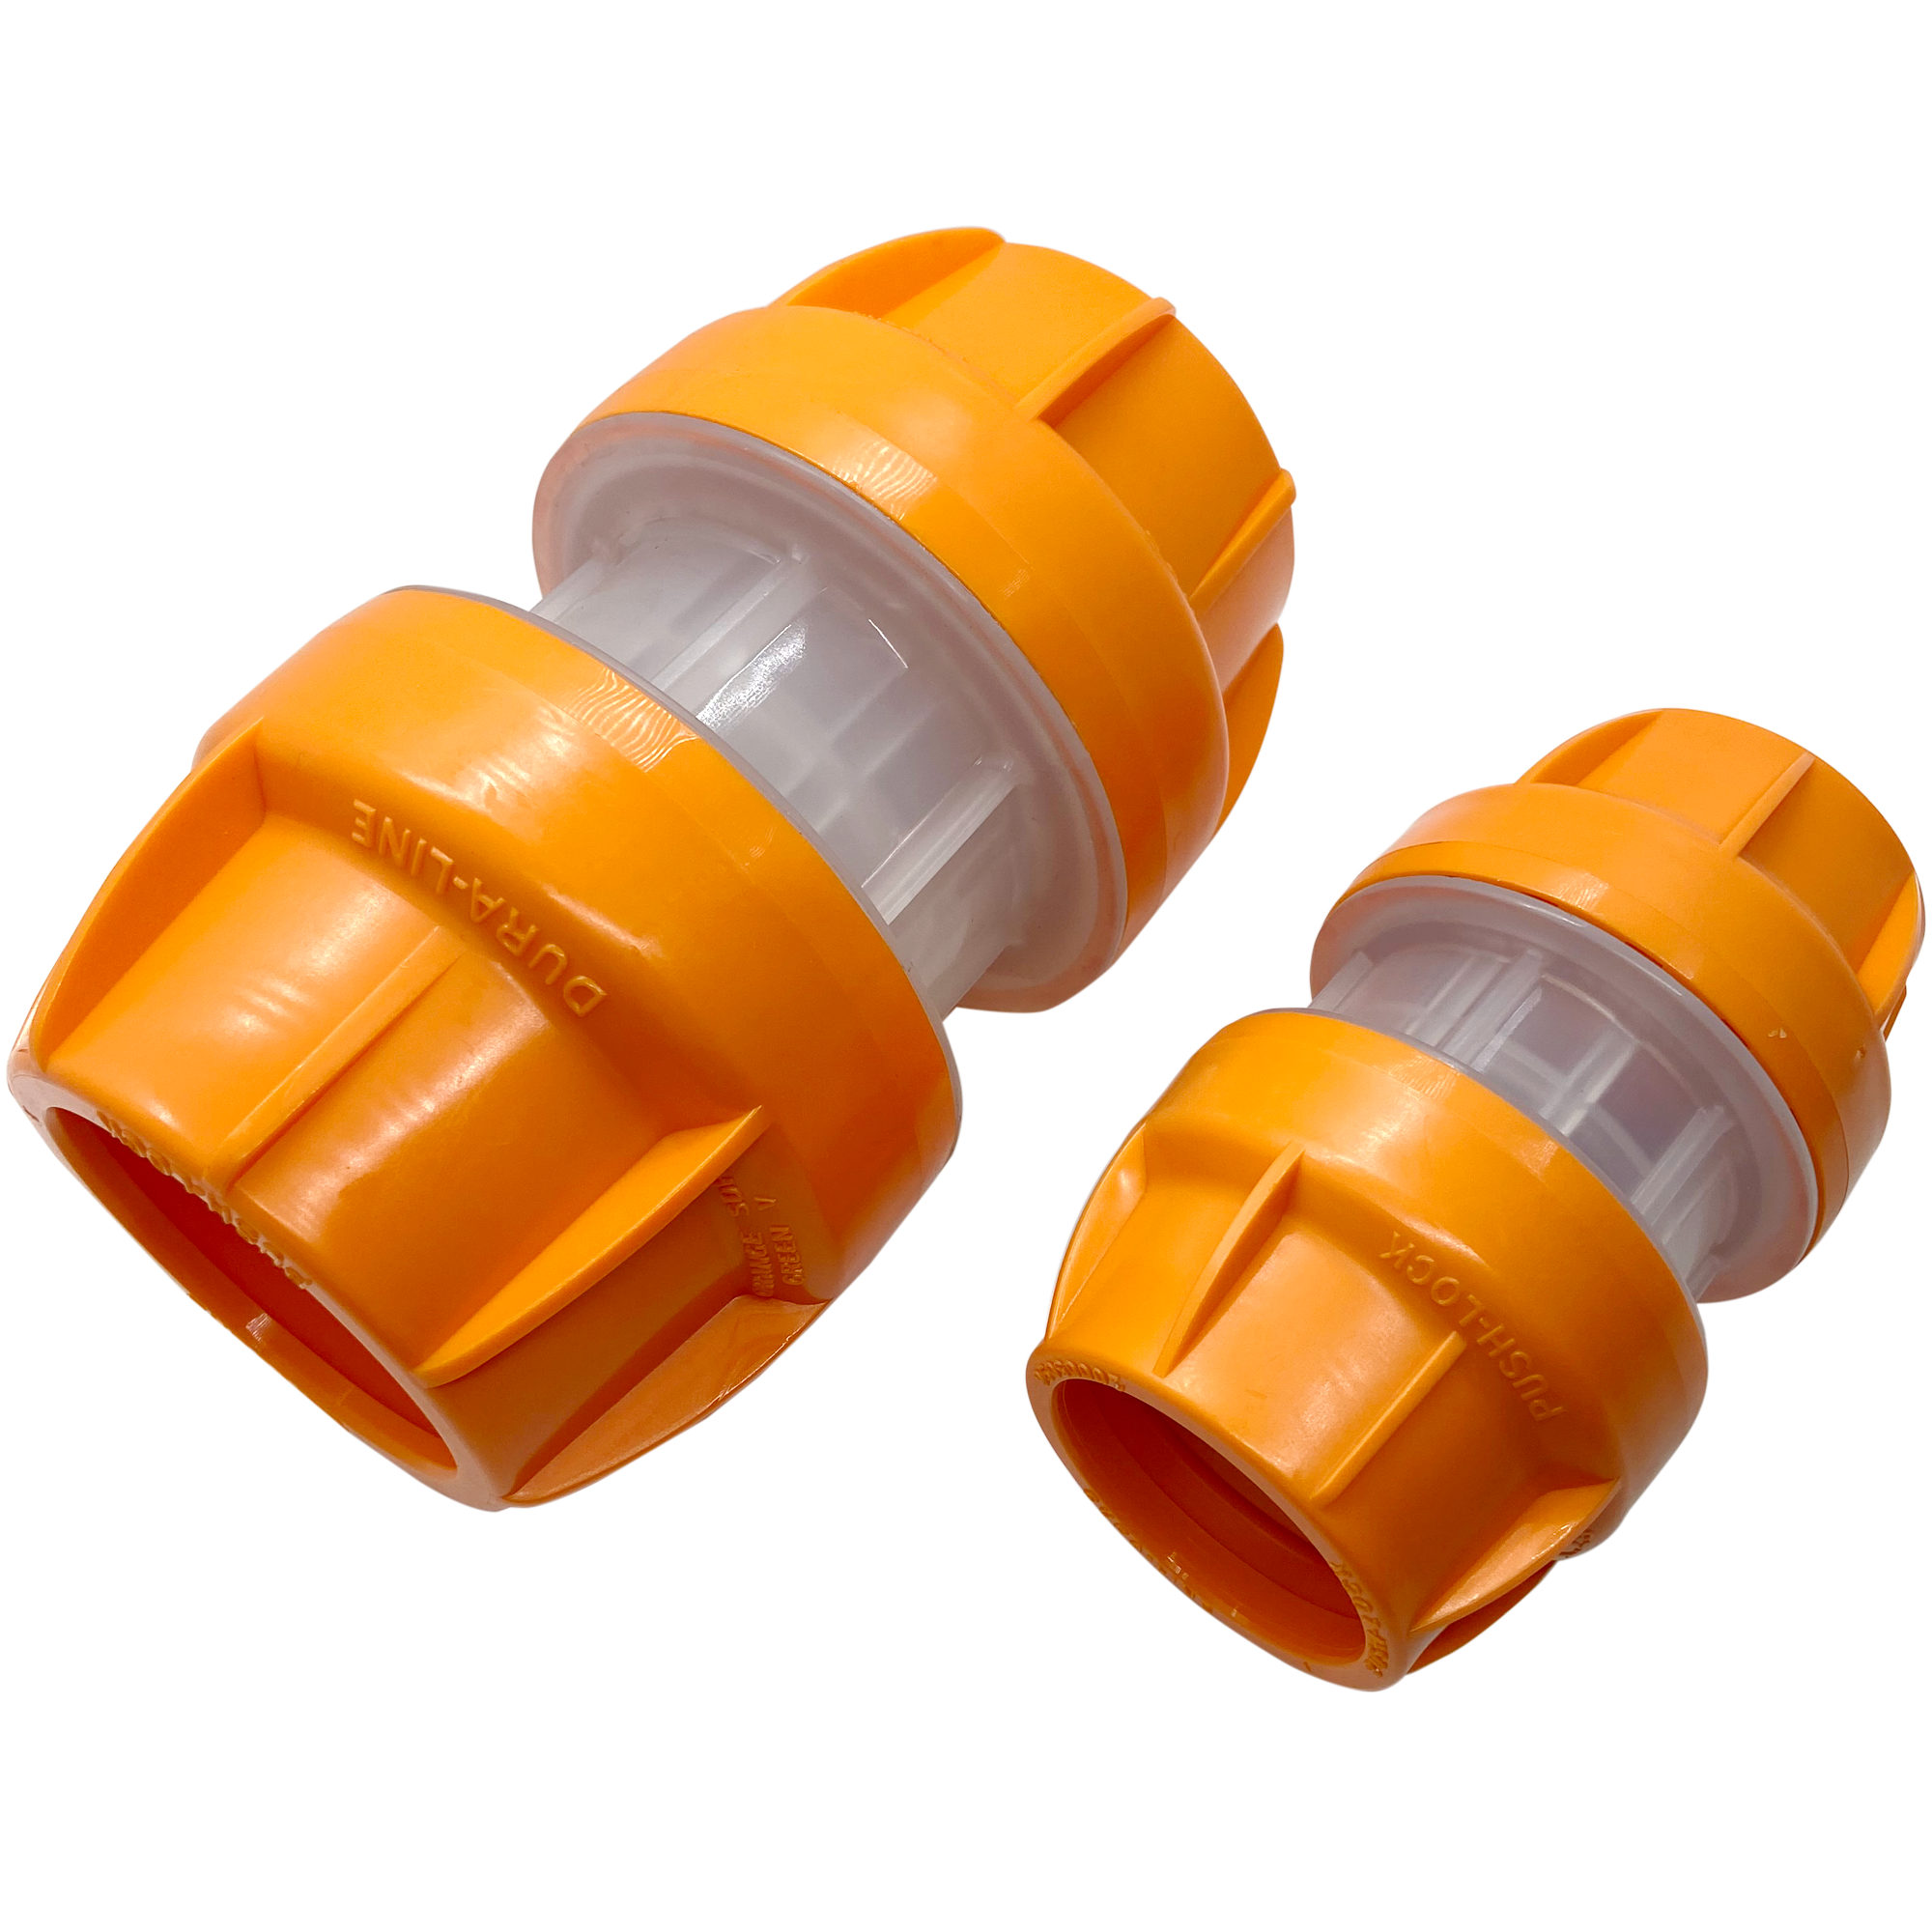 Experience the same fast and easy installation of our Push-Lock couplers now with a new, clear body design. Simply push the duct ends into the coupler for a locked and air-sealed assembly. Slightly shorter than the original Push-Lock, the Clear-Lock is ideal for pull boxes, vaults or other limited access areas. The non-metallic construction provides excellent corrosion resistance in buried or encased applications and also has desirable dielectric properties.